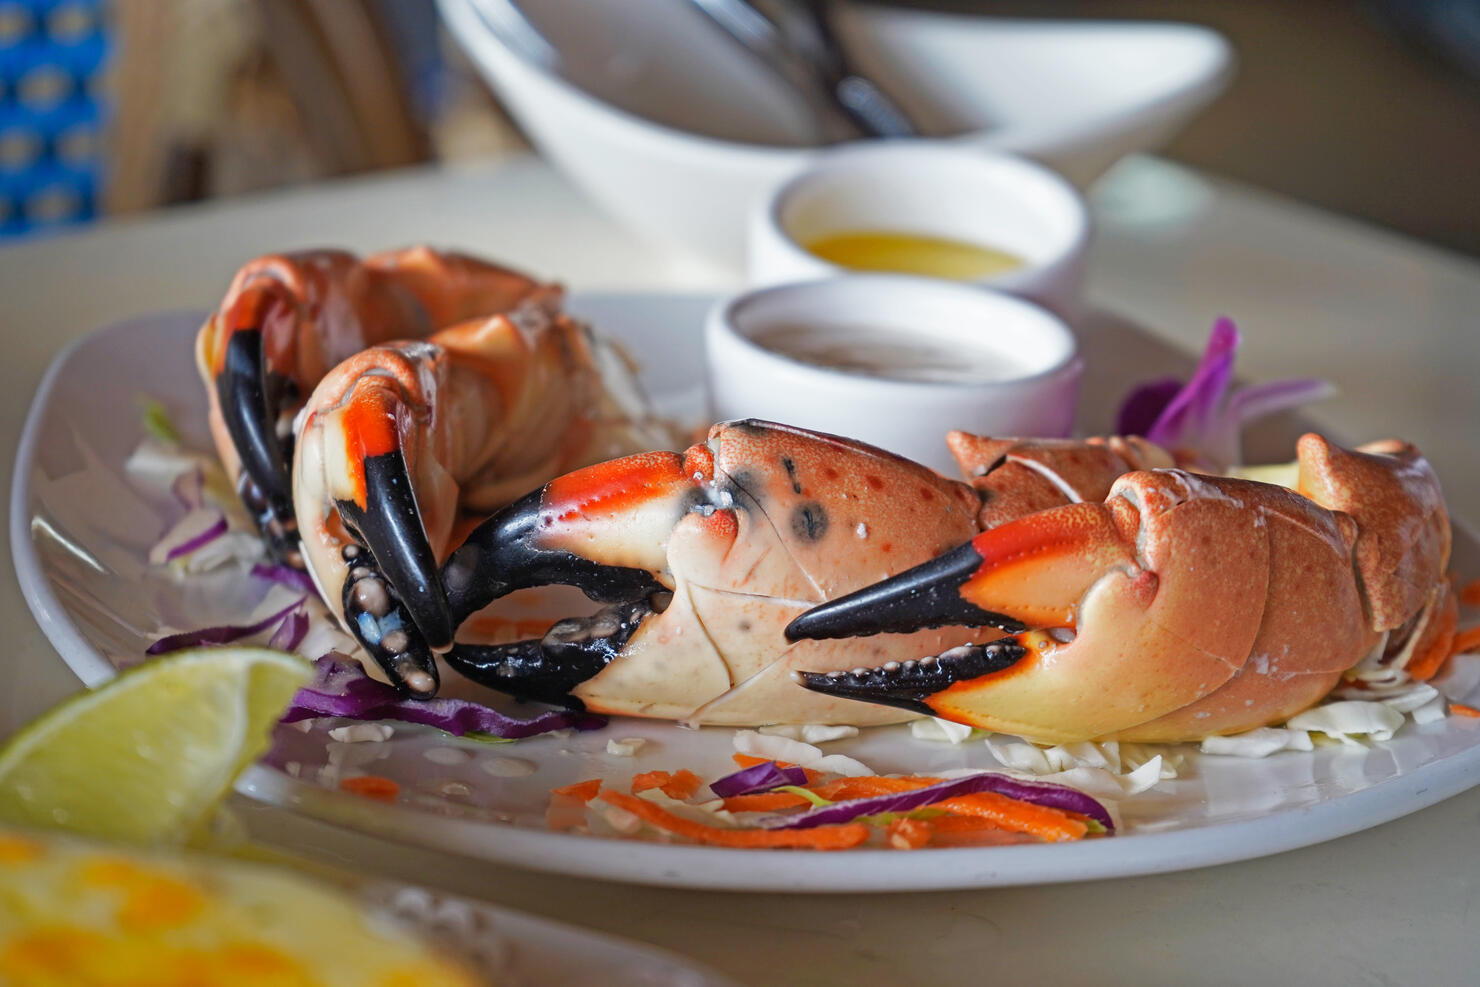 Florida Stone crab claws served with butter and dip at the resaturant in Miami, USA